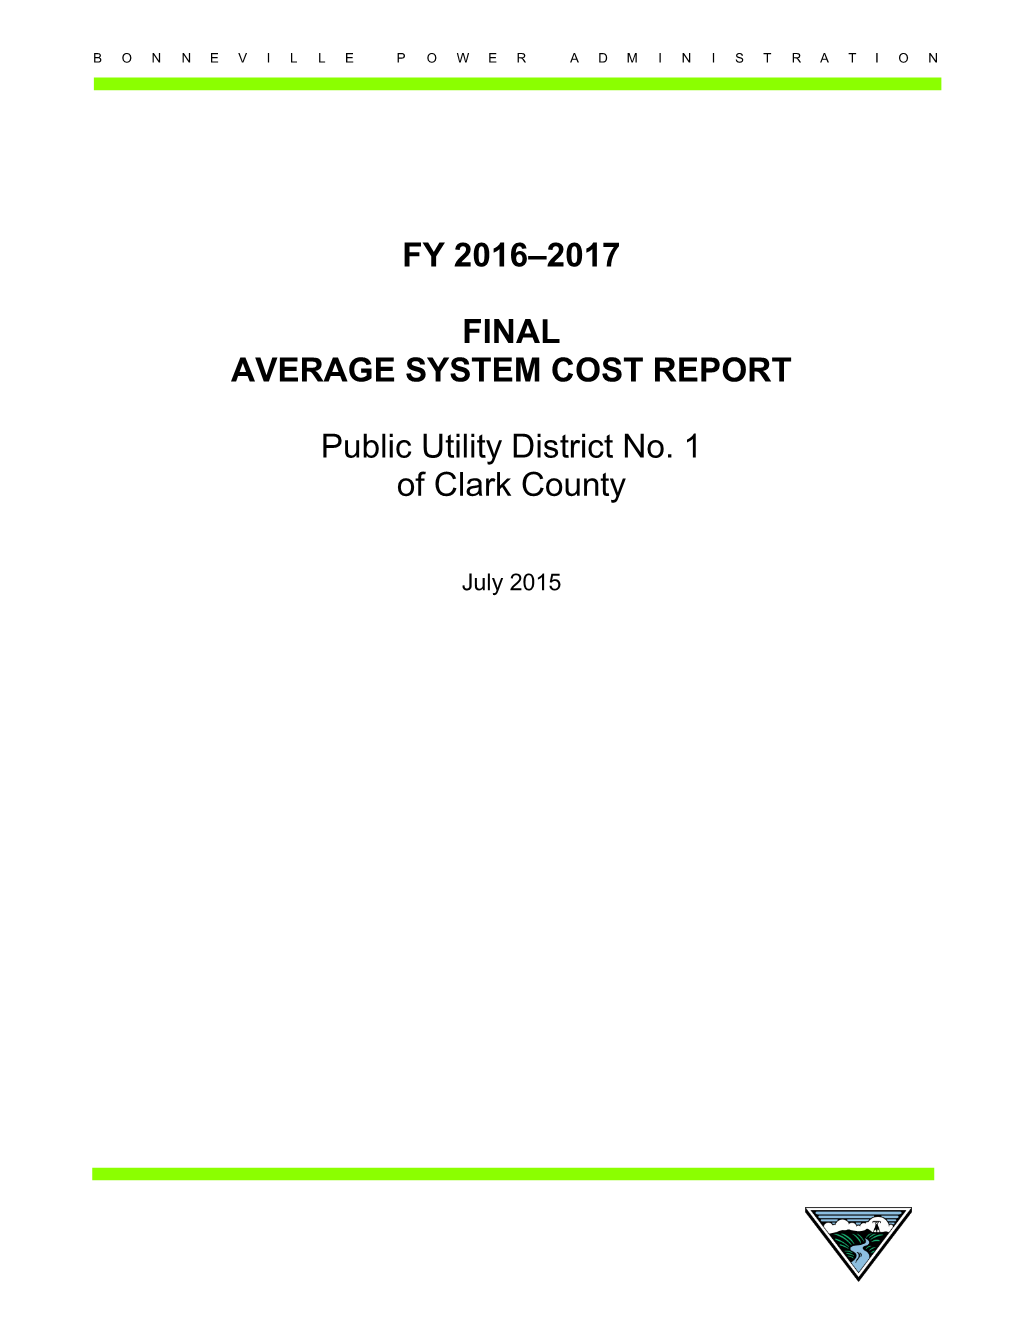 Public Utility District No. 1 of Clark County FY 2016-2017 Final ASC Report, July 23, 2015